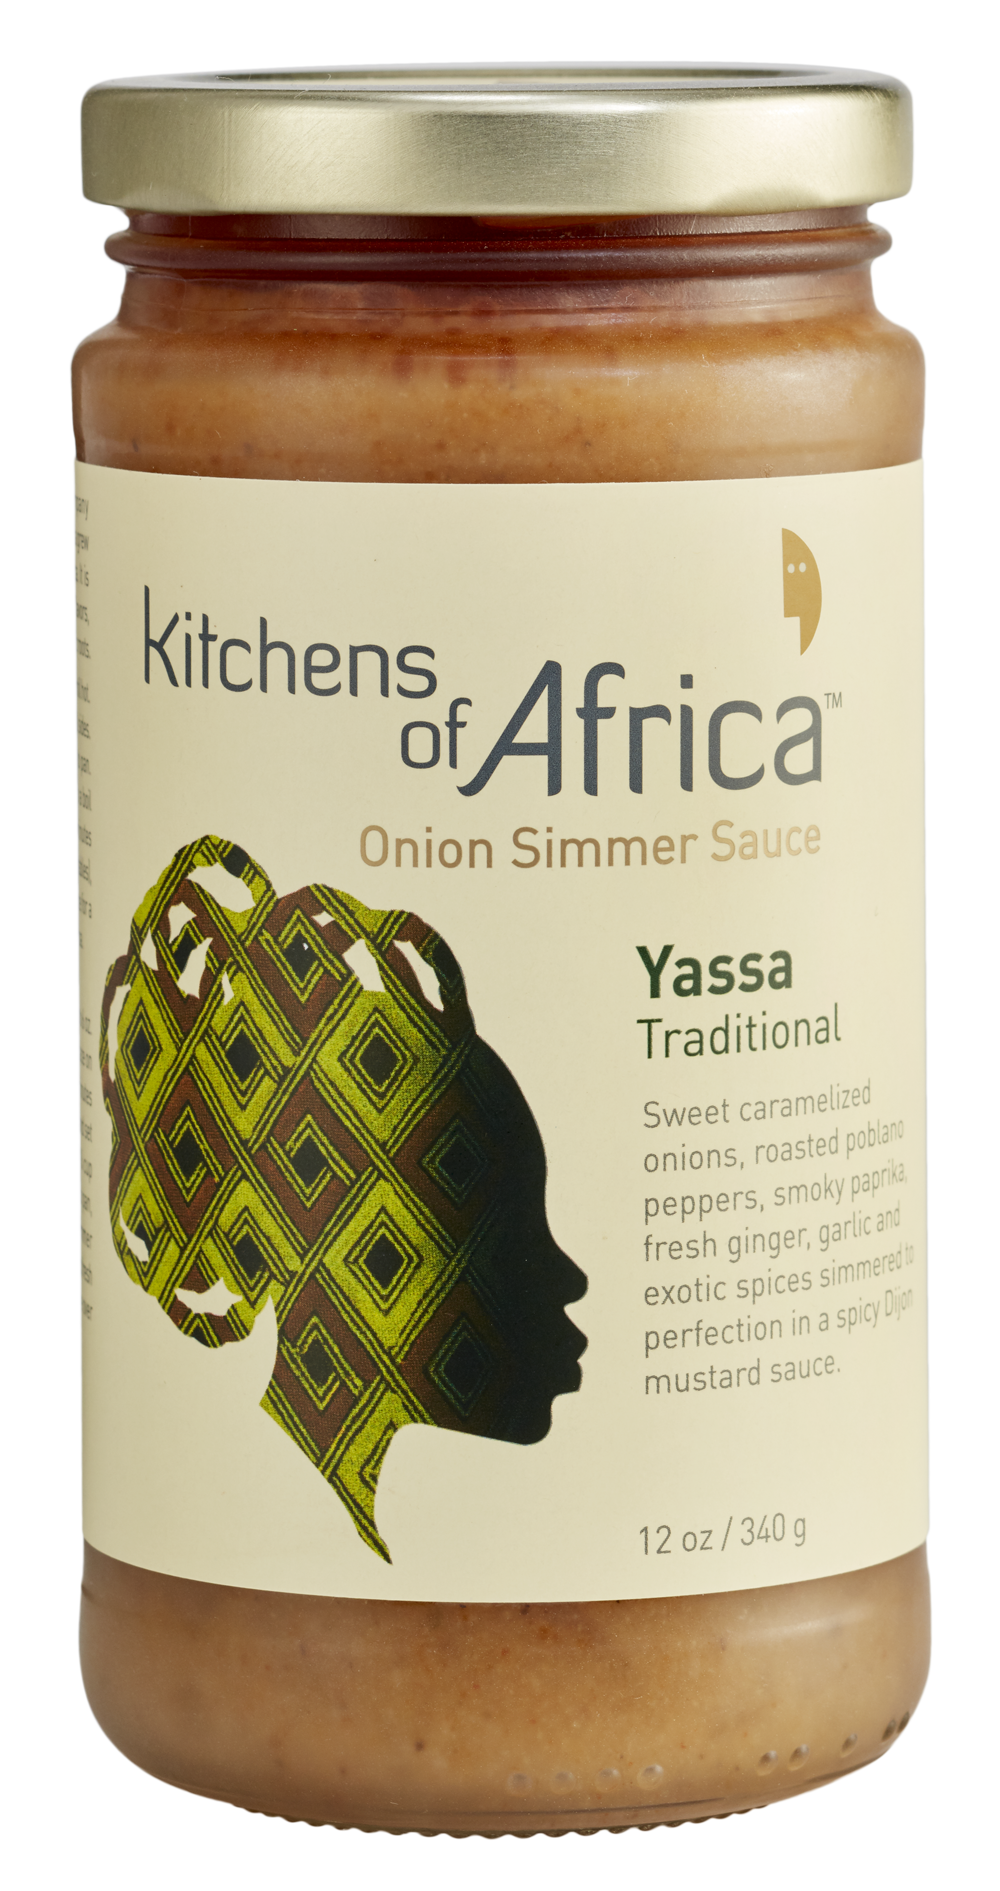 Kitchens of Africa - Yassa Traditional - Onion Simmer Sauce